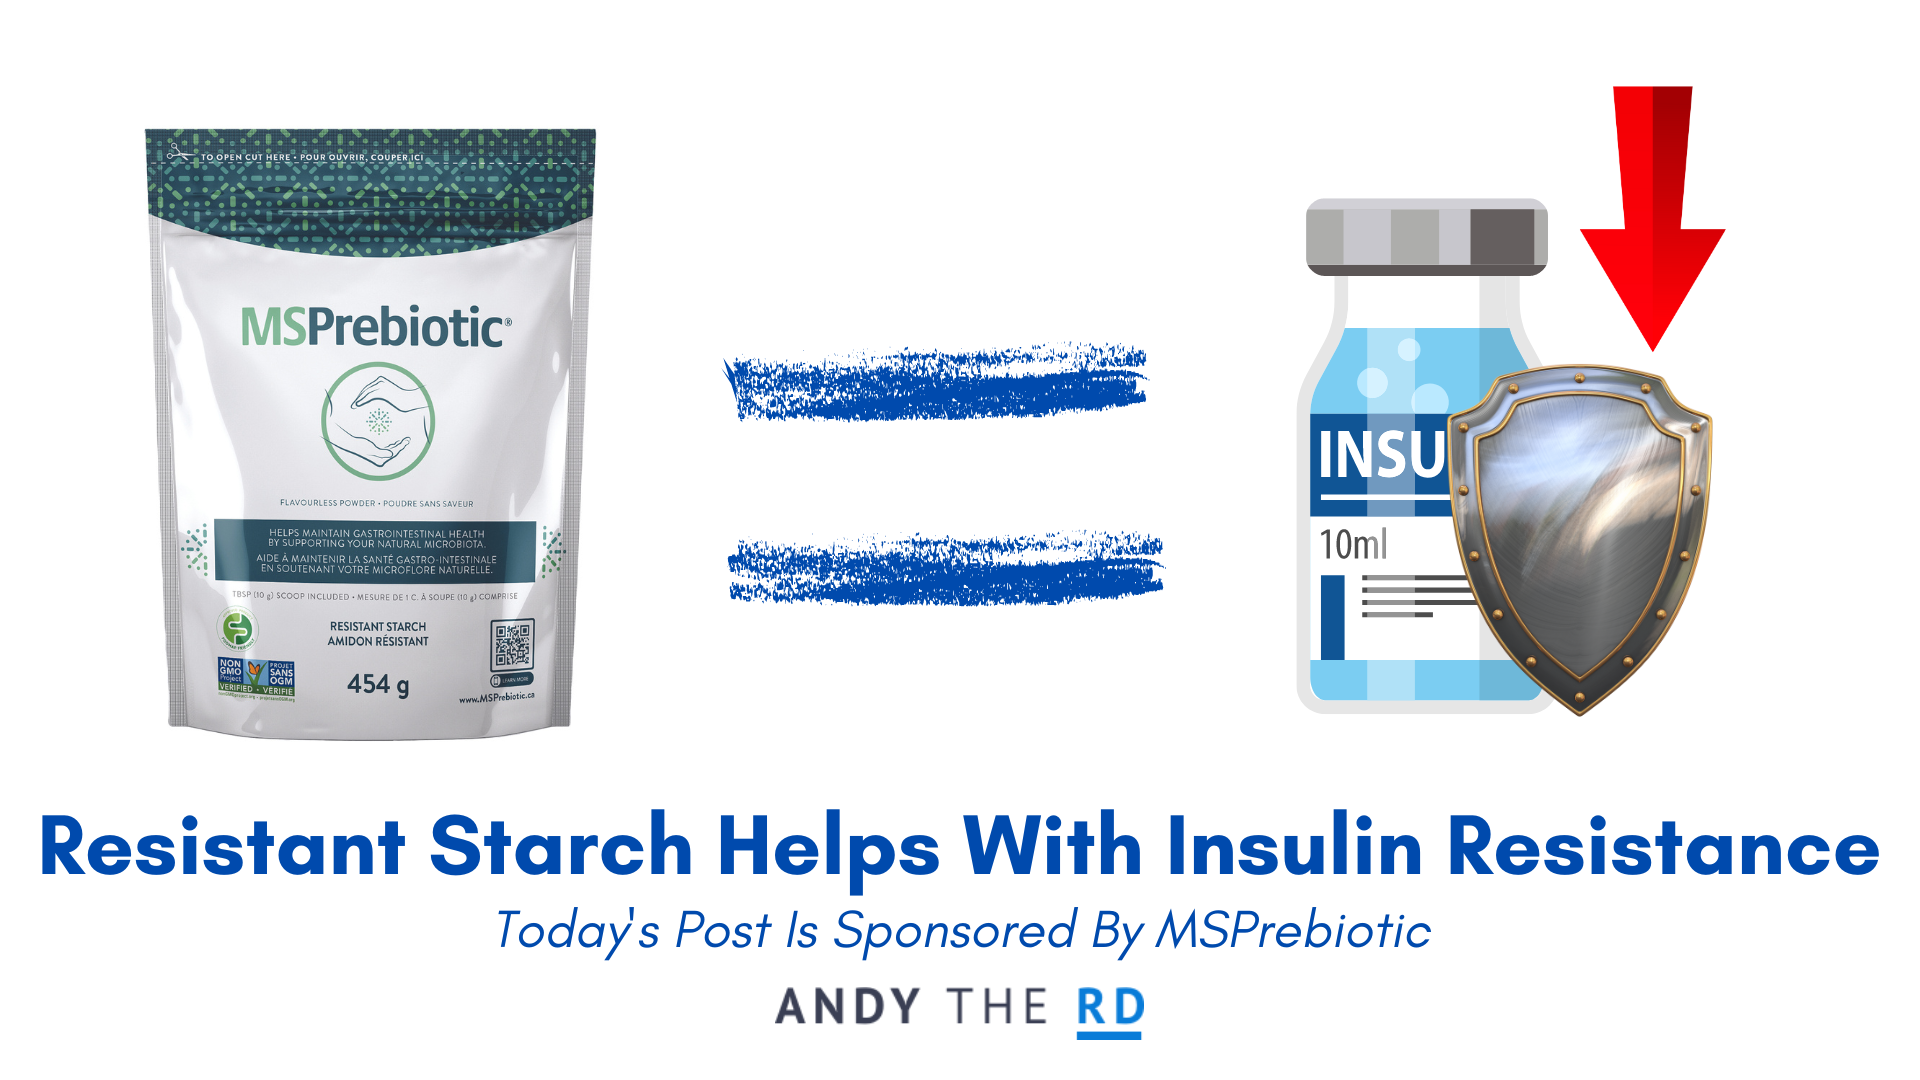 Resistant Starch Reduces Insulin Resistance